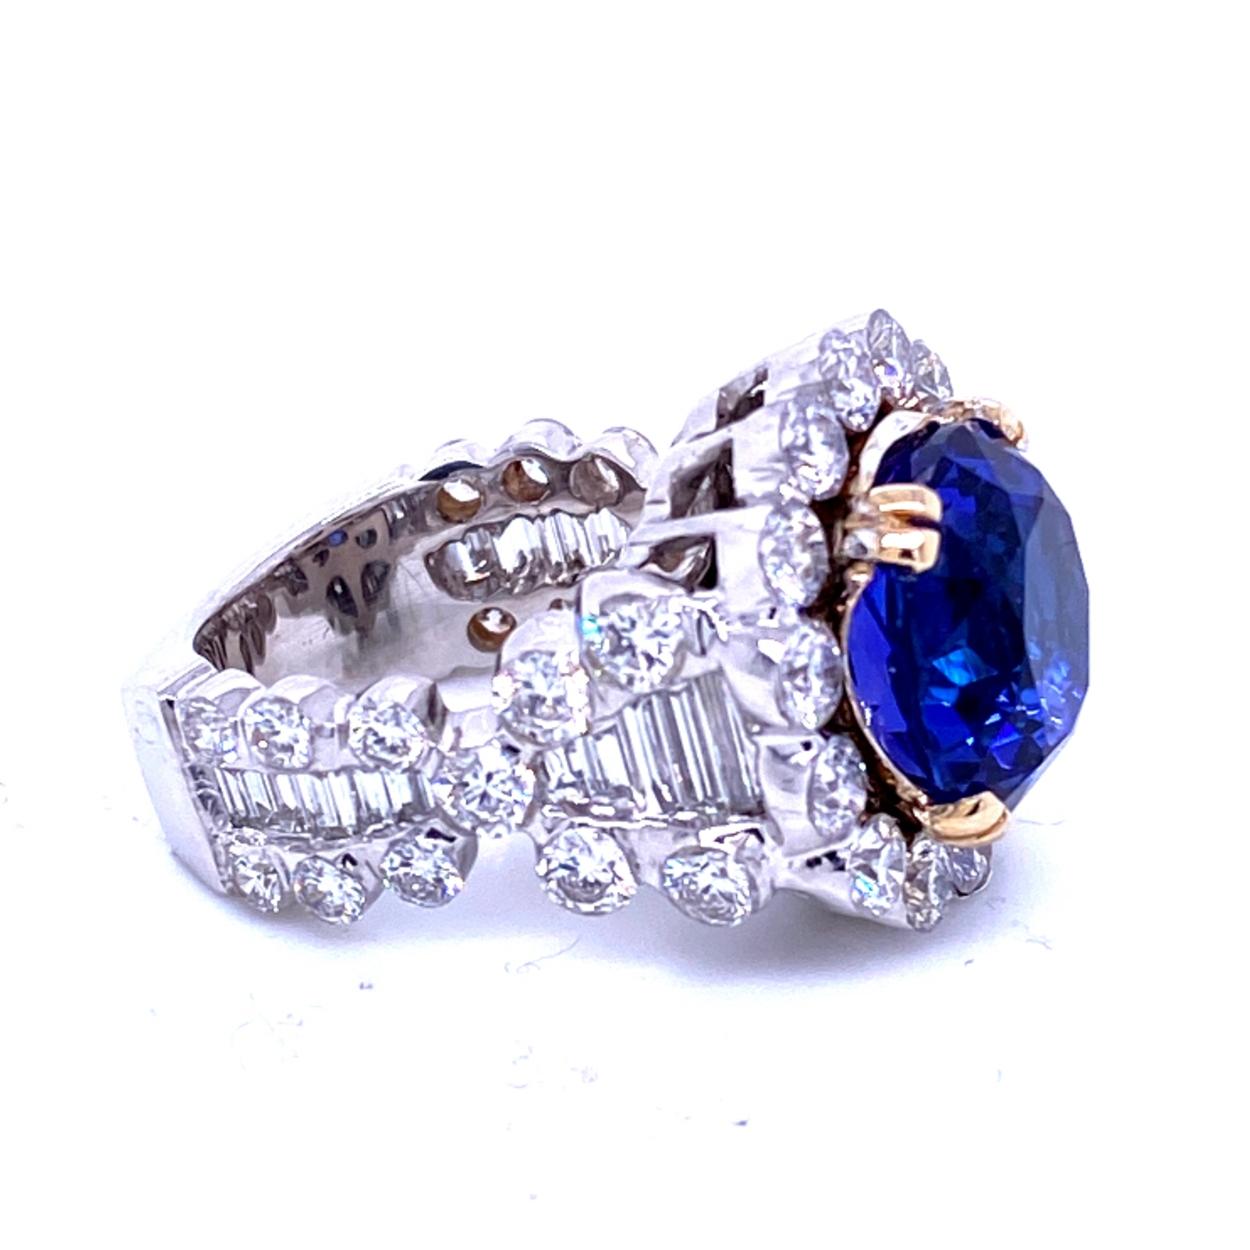 A beautiful color 8.23 Ct Round shaped Tanzanite (looks like Sapphire) set in the center of an 18K Square Shank Invisible set (you see no metal) Diamond Engagement Ring. 

Details:
Center Stone: 8.23 carat Round Tanzanite - 12.5 mm
Side Stone